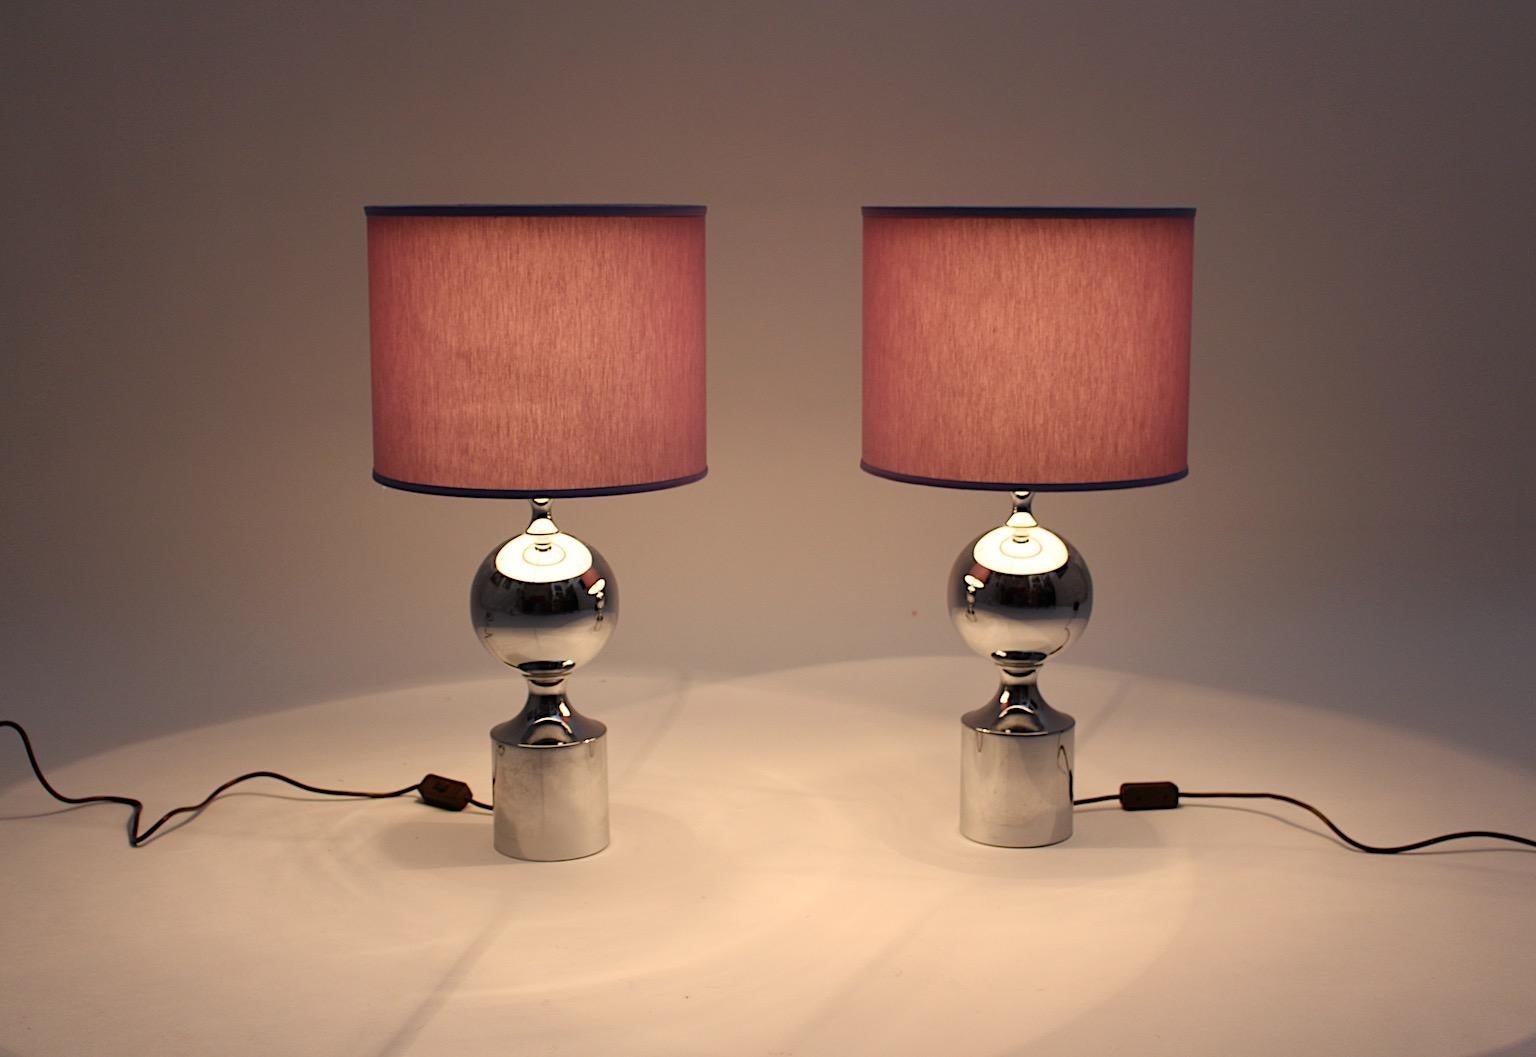 A pair of Mid-Century Modern chromed vintage table lamps with renewed lavender colored chintz fabric shades.
The elegant and sophisticated combination of chromed color and lavender color is very beautiful and a classical favorite and is one of the